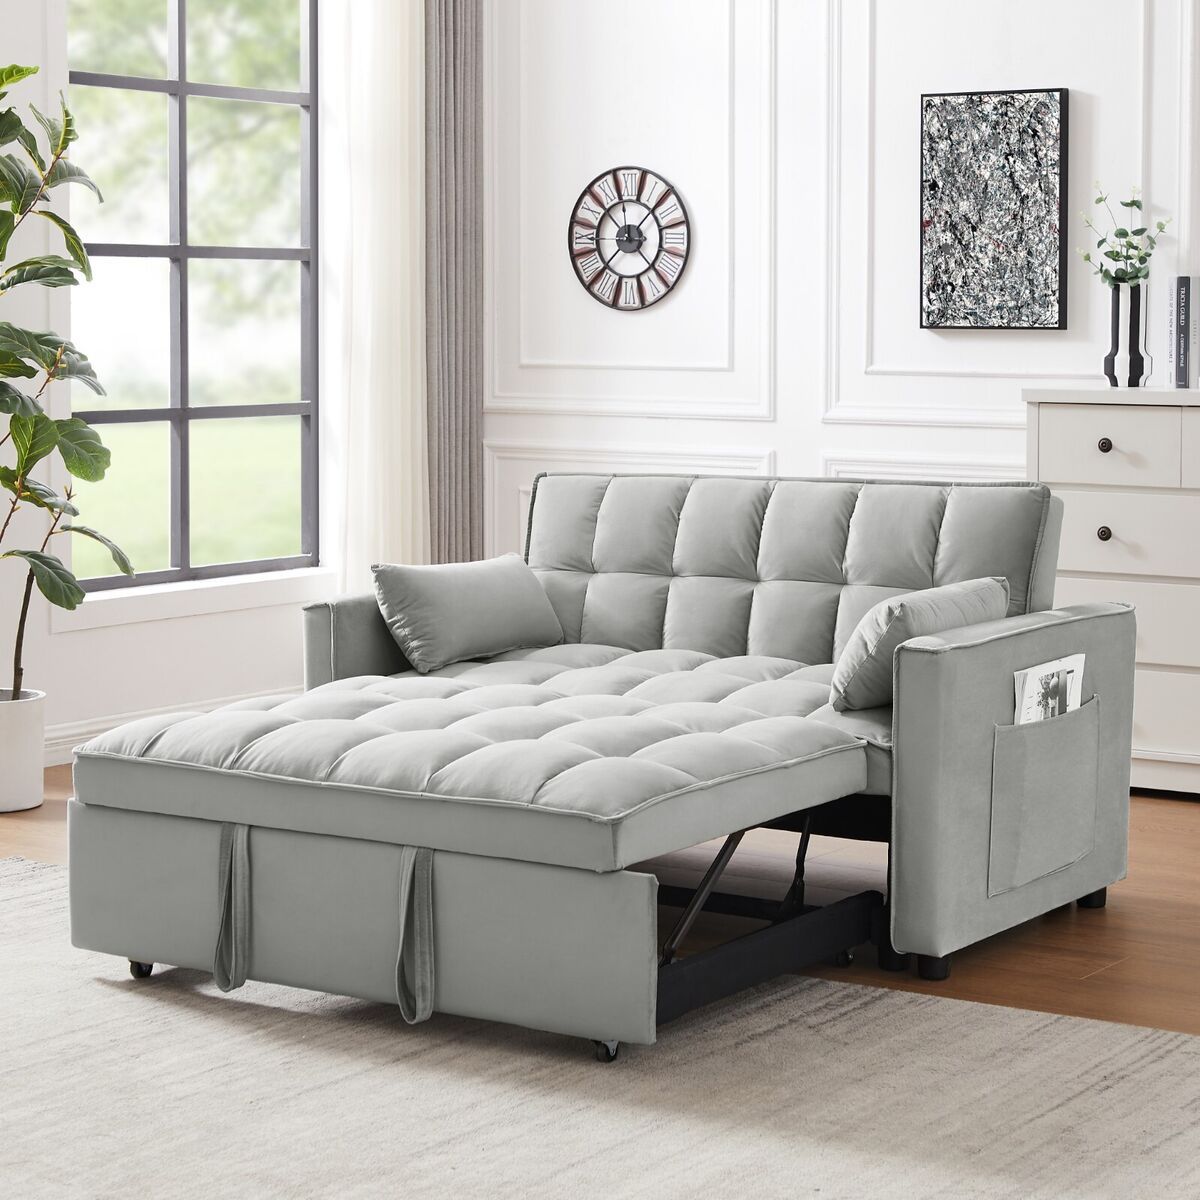 Convertible Sleeper Sofa Velvet Loveseat Sofa W/Pullout Bed 3 In 1 Folding  Sofa | Ebay For 3 In 1 Gray Pull Out Sleeper Sofas (Photo 1 of 15)